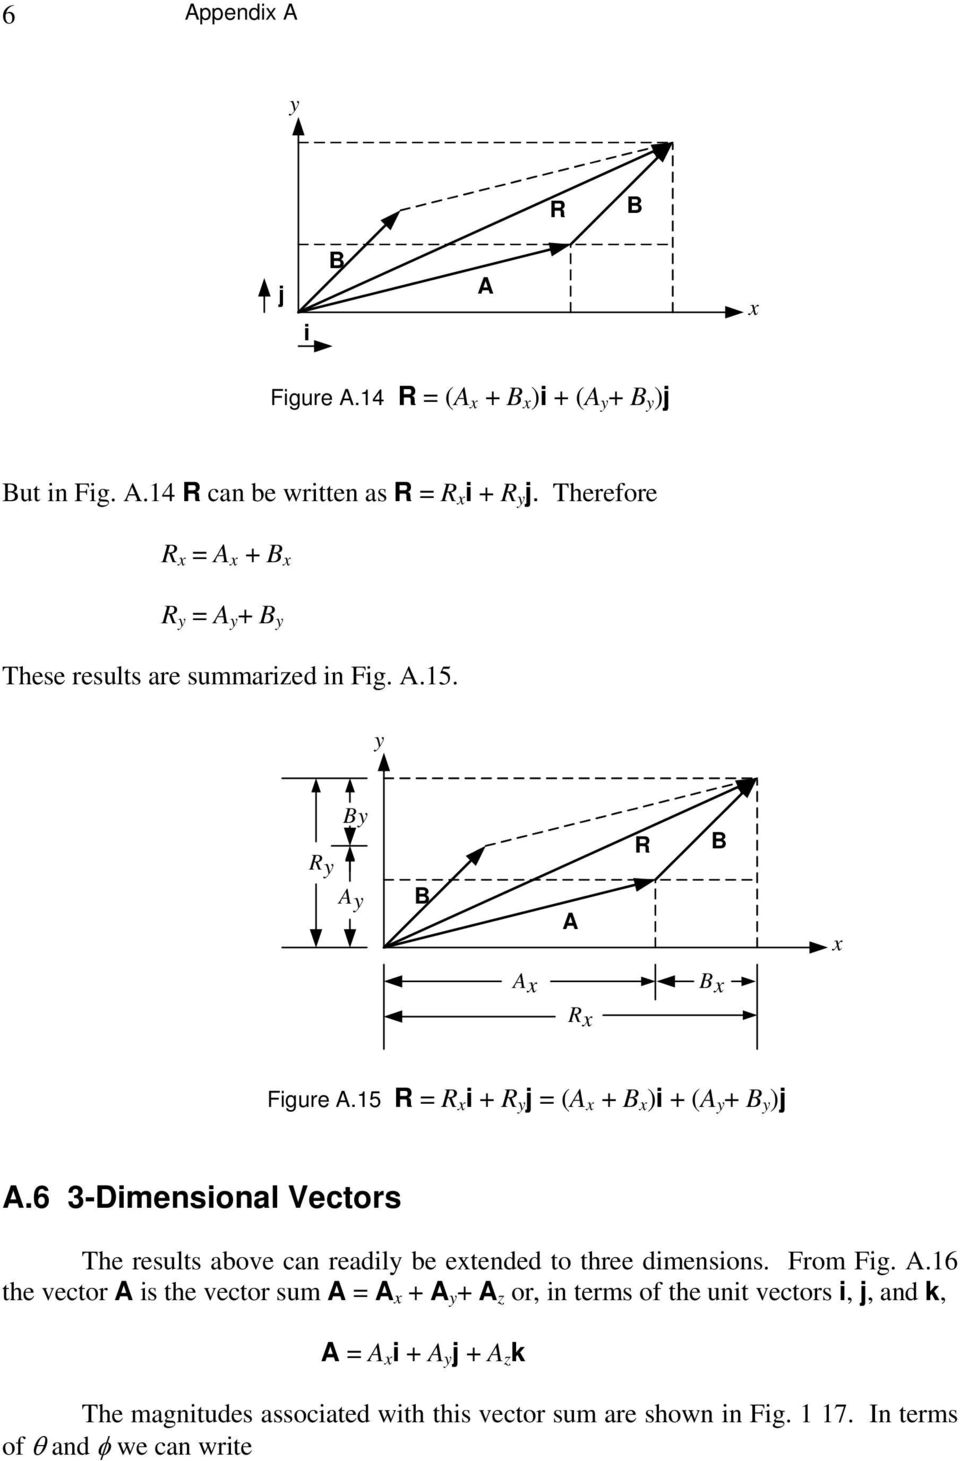 6 3-Dimensional Vectors The results above can readil be etended to three dimensions. From Fig.